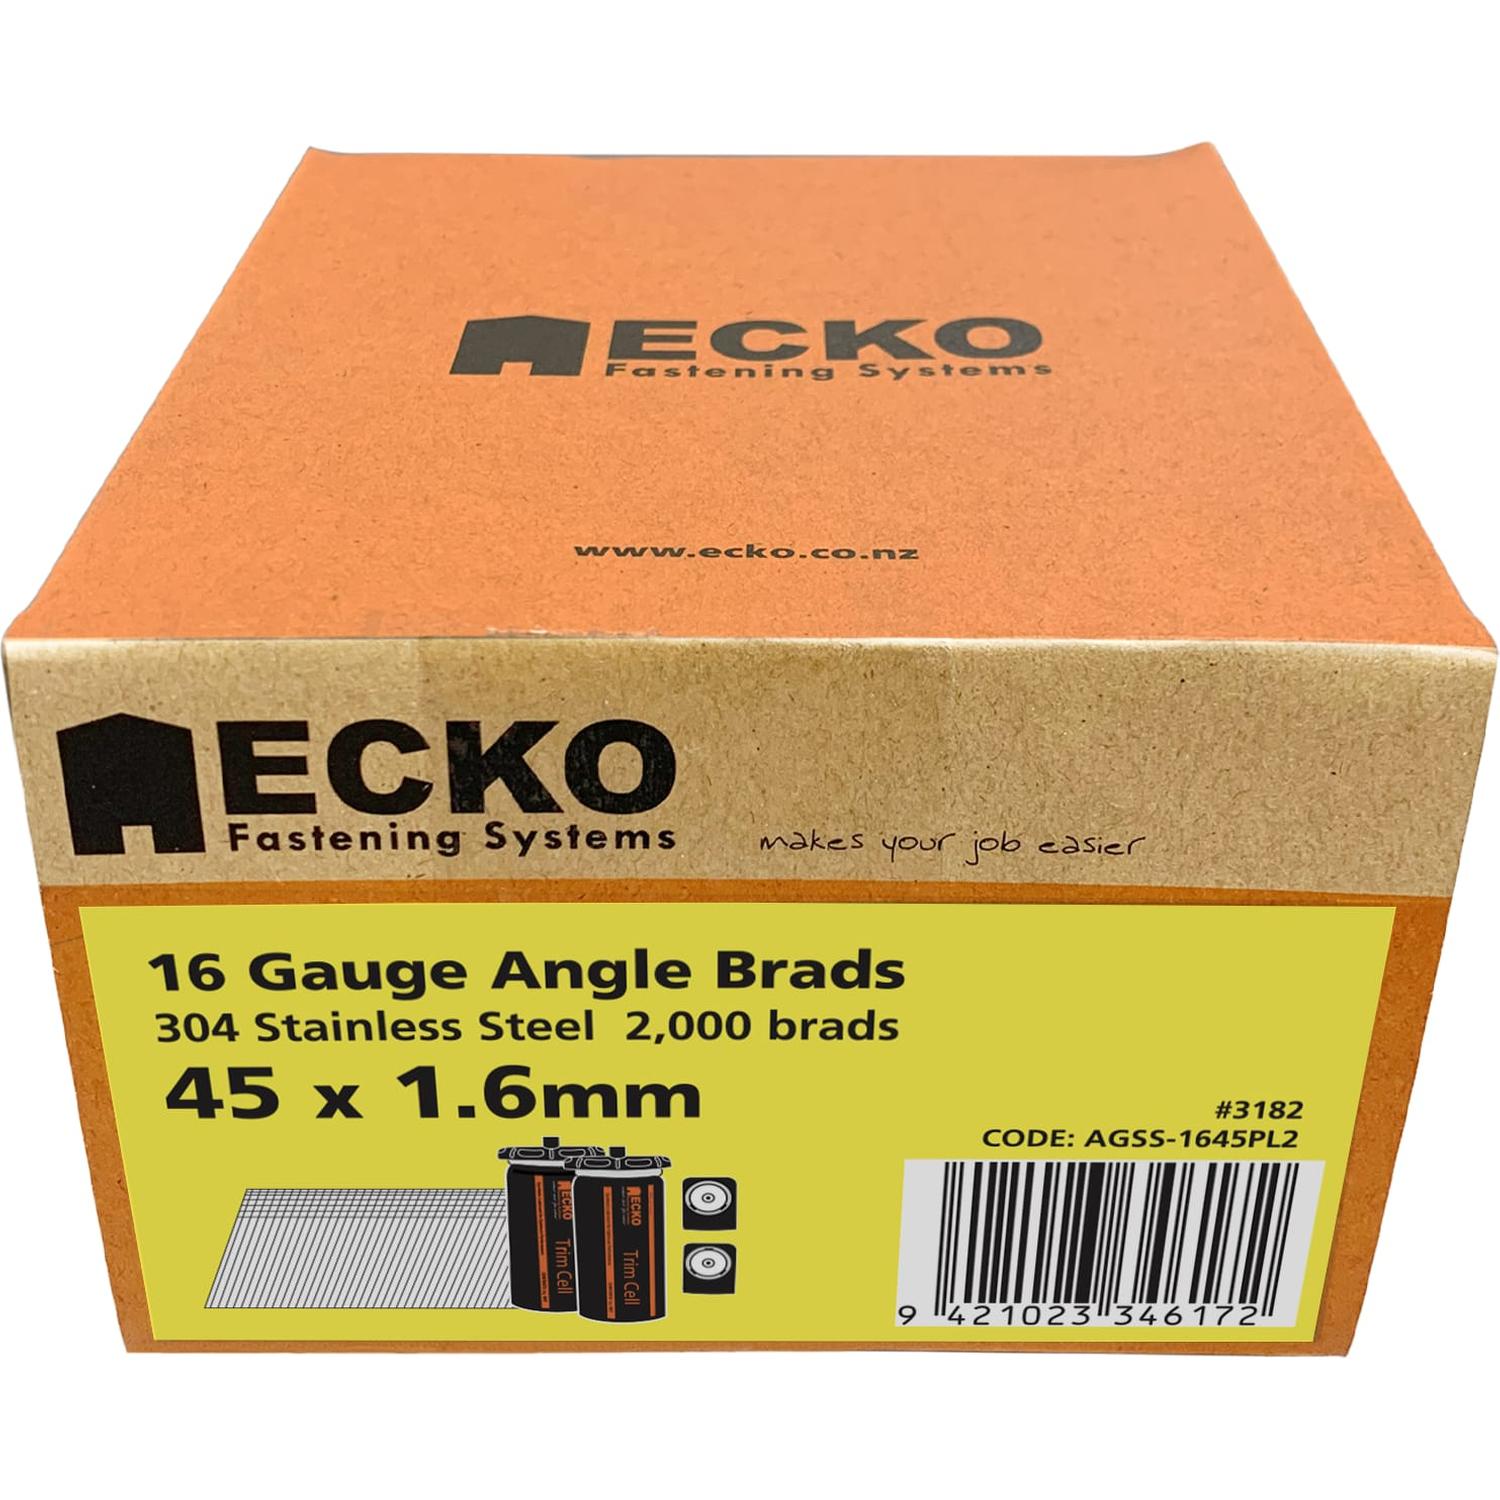 Ecko 16 Gauge Angle Brads Gas Pack 45 X 1.6Mm 304 Stainless Steel (2000)